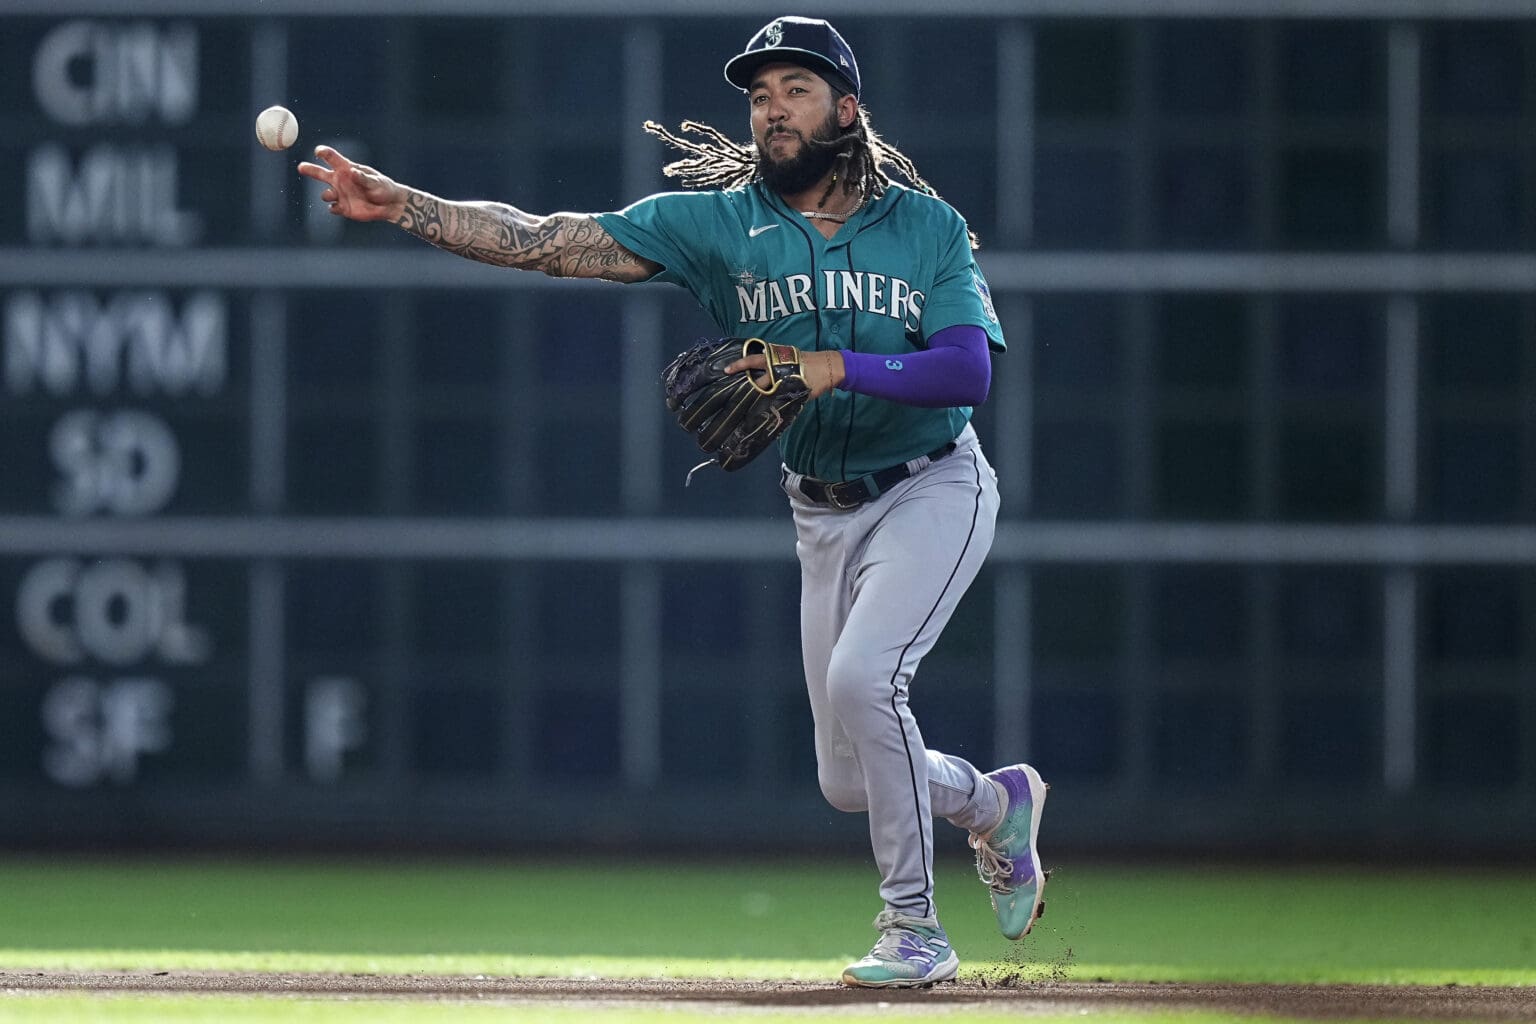 Seattle Mariners shortstop J.P. Crawford lifts a leg as he pitches the ball.